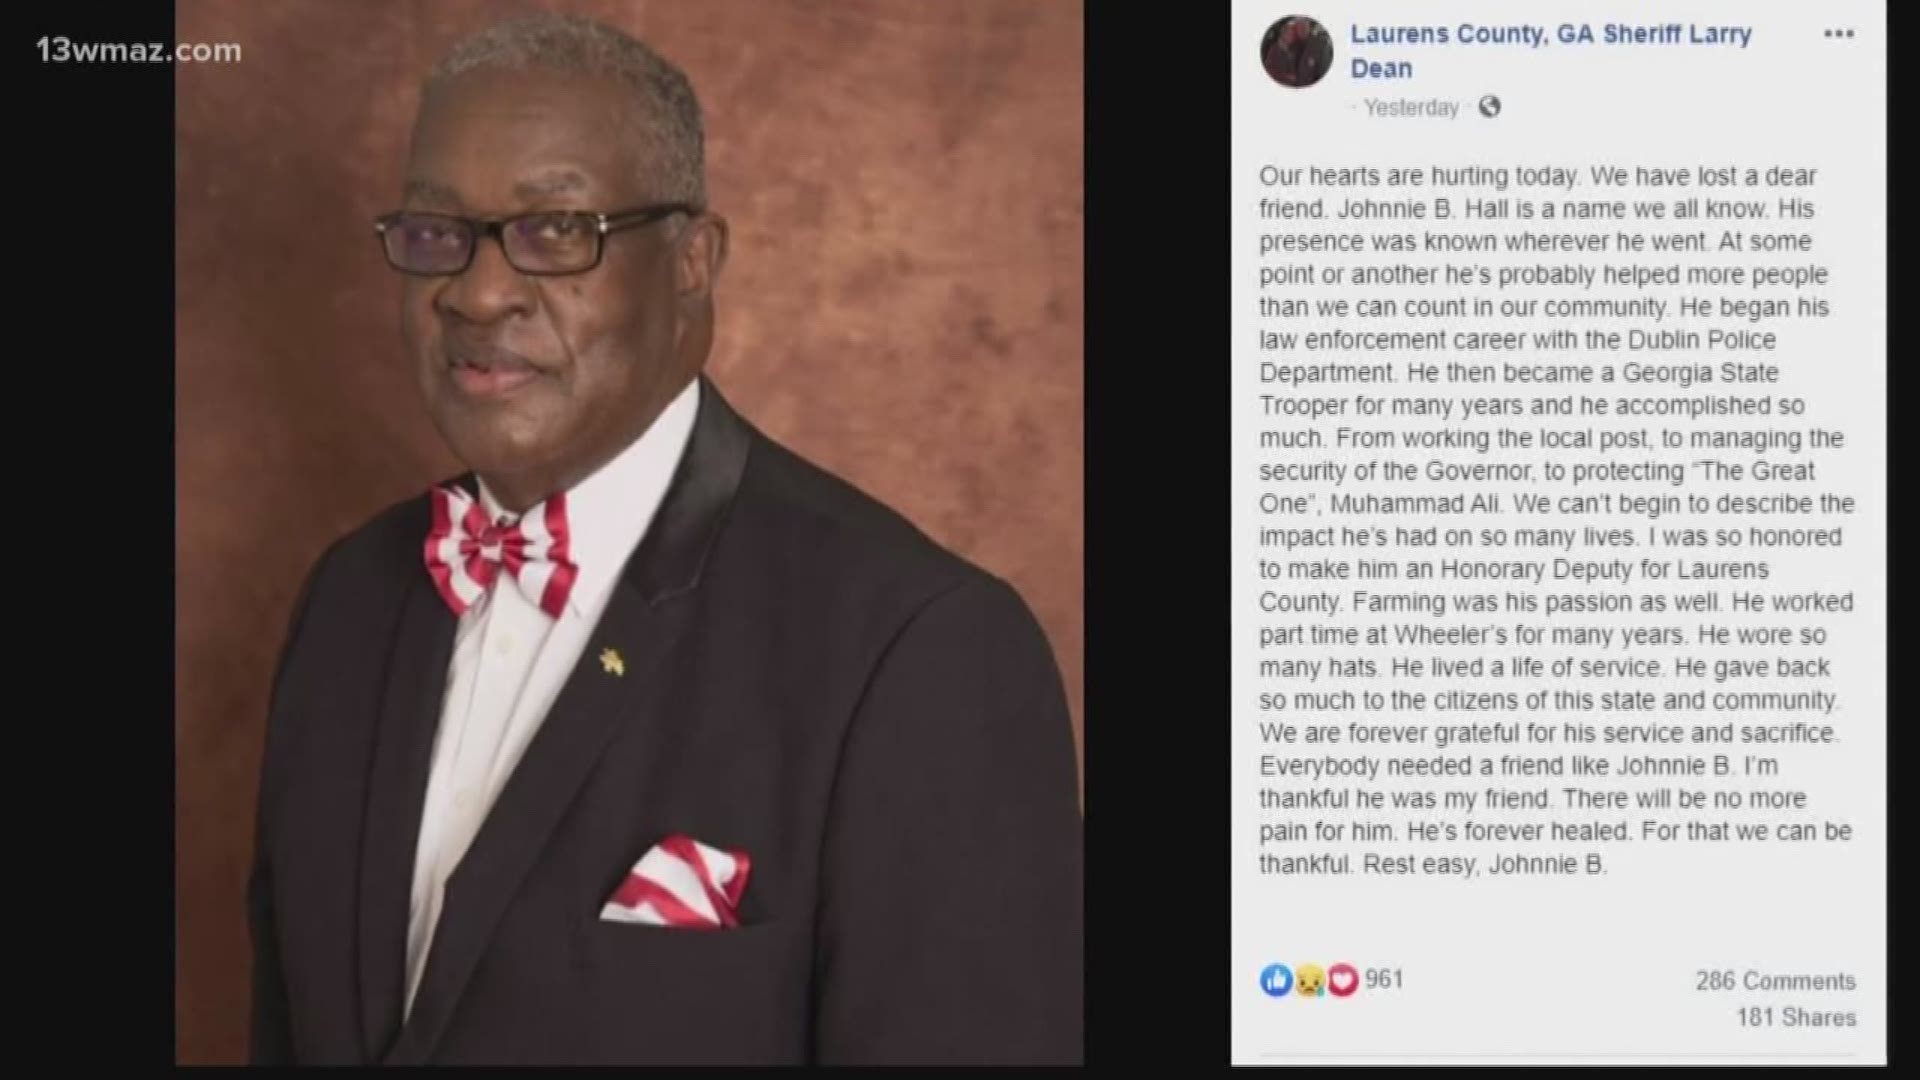 Johnnie B. Hall passed away last week at the age of 72. He was a former policeman for Dublin and a Georgia State Patrol trooper that got to protect Muhammed Ali.